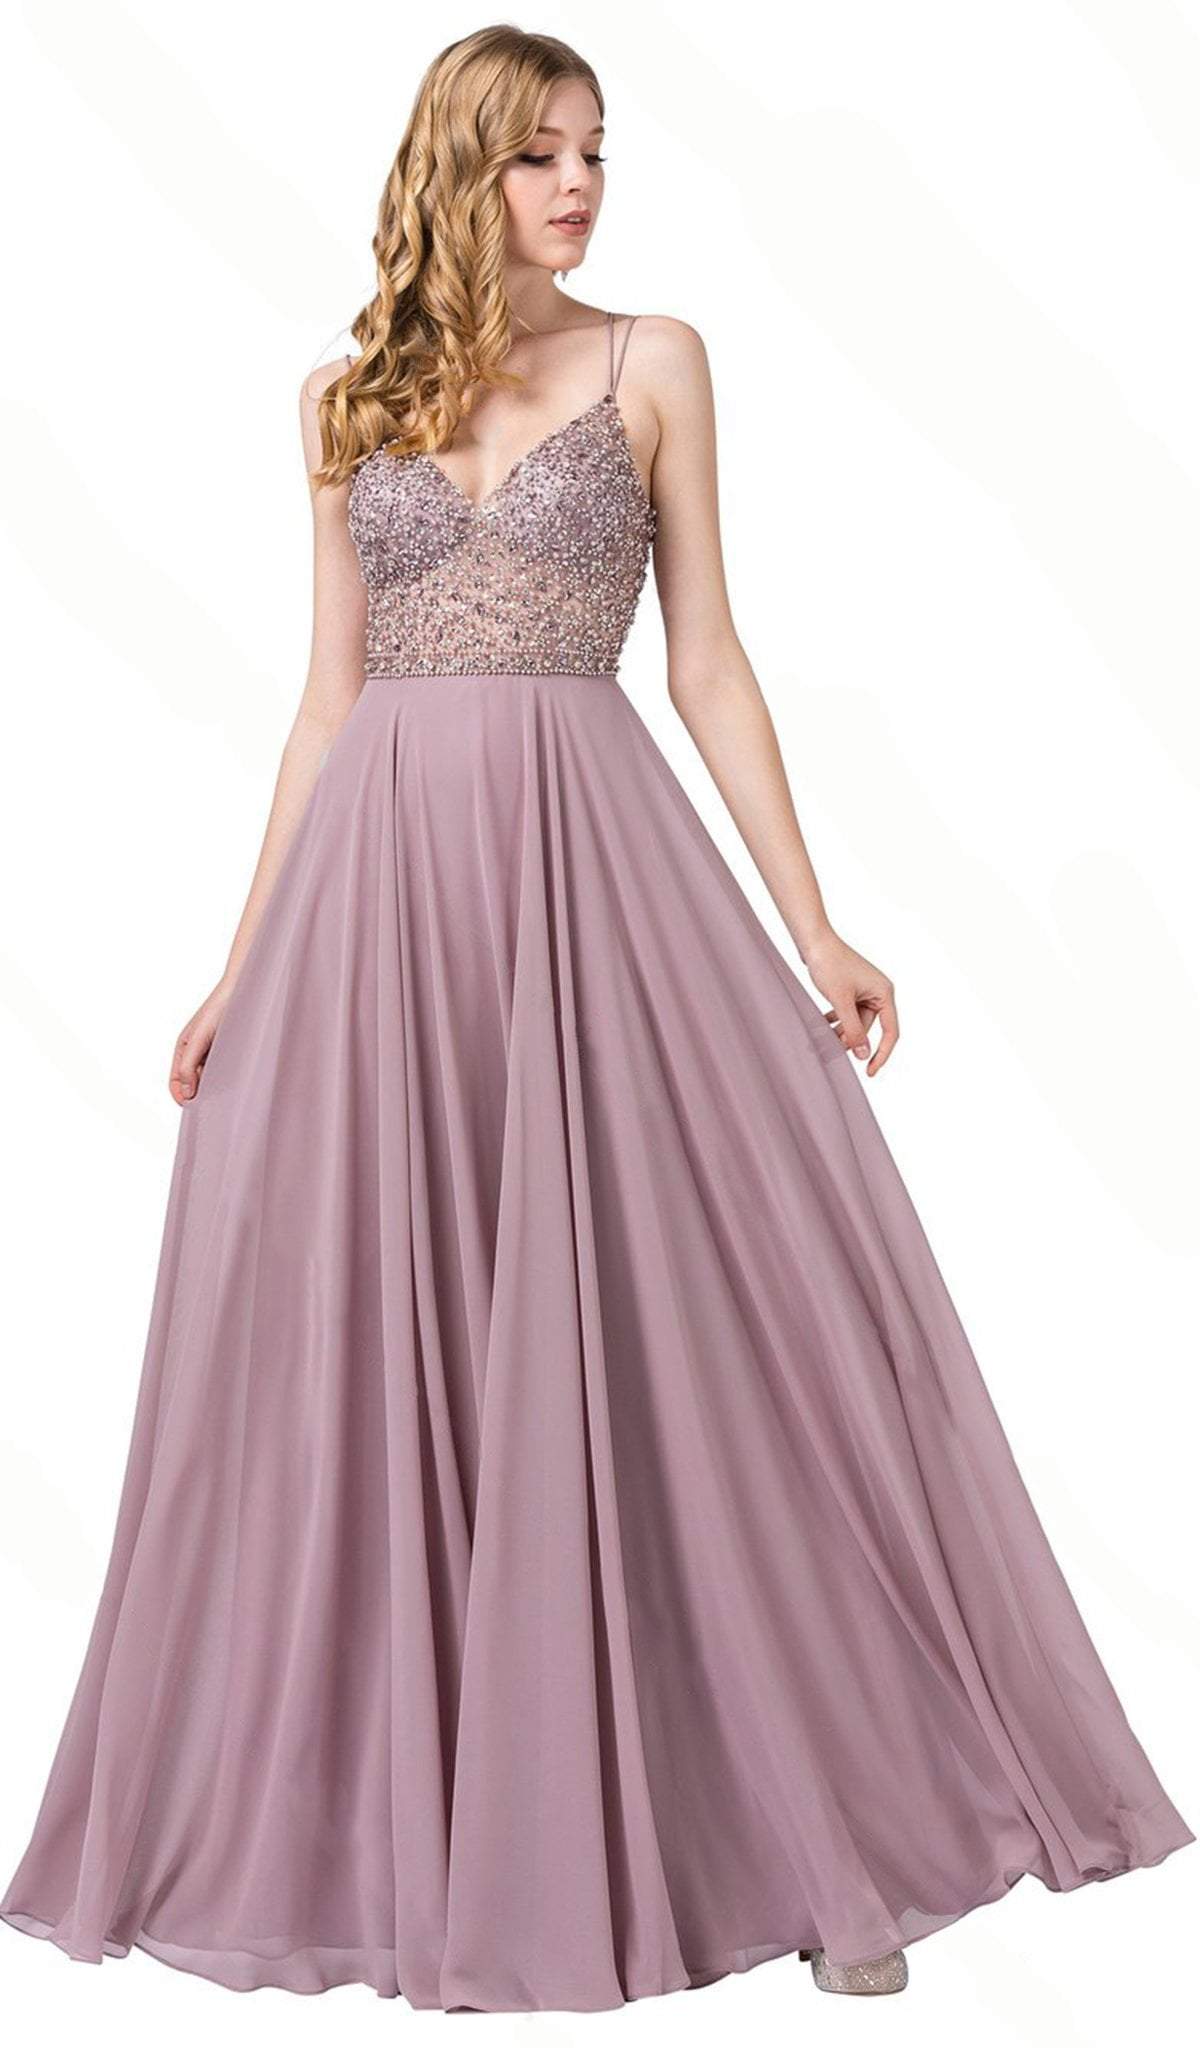 Image of Dancing Queen - 2780 Beaded V-Neck Prom Gown